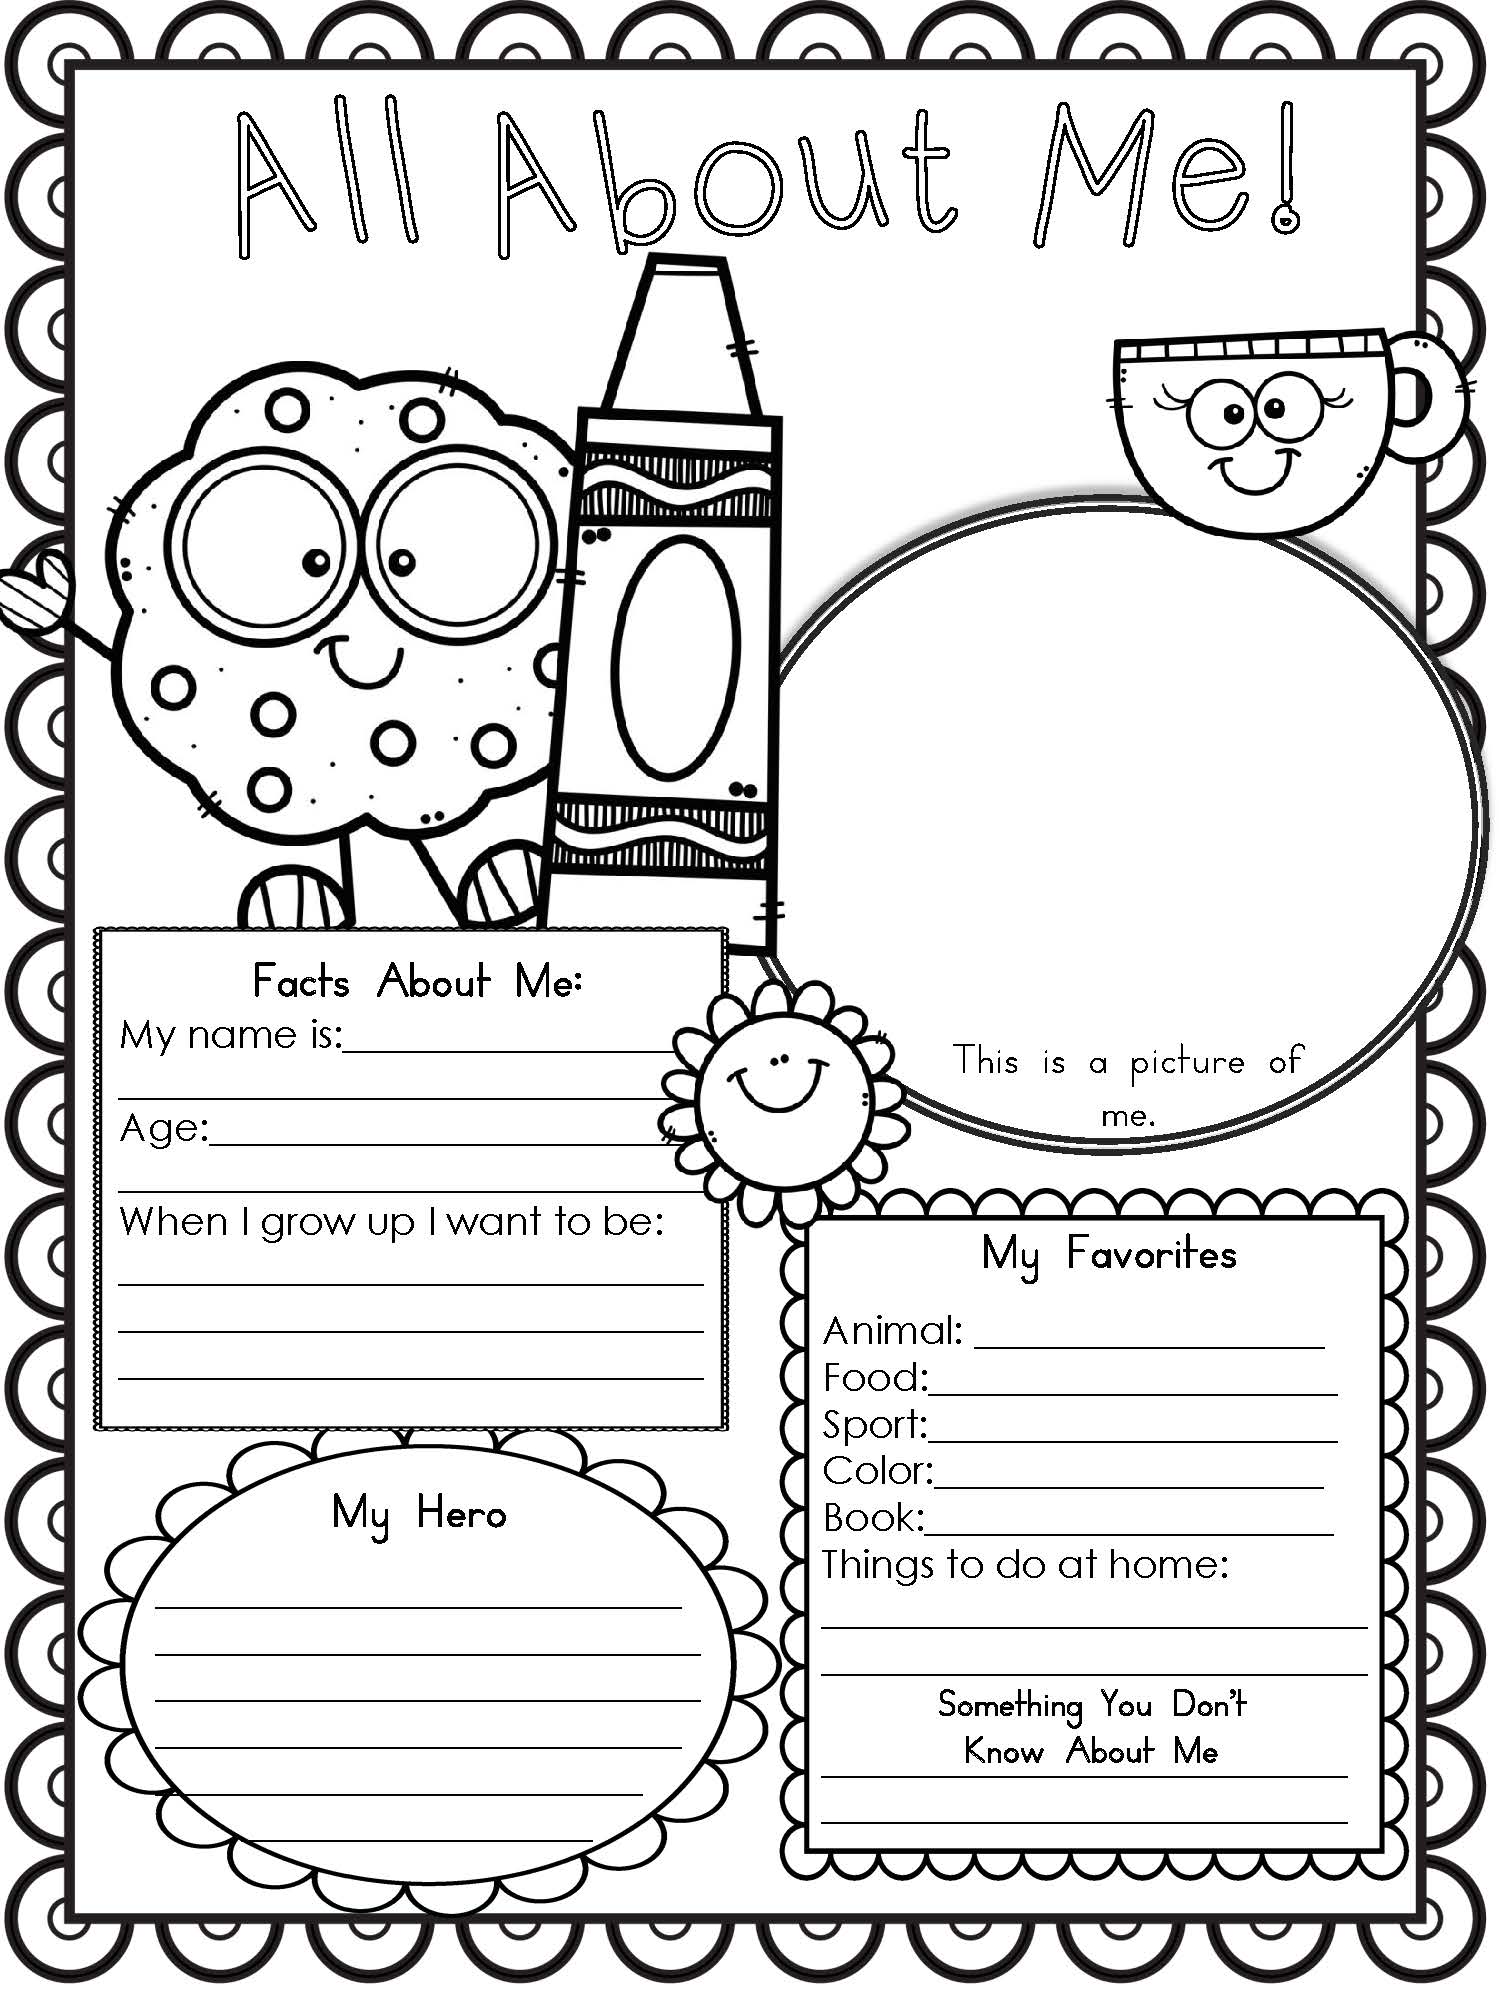 Free Printable All About Me Worksheet - Modern Homeschool Family For All About Me Worksheet